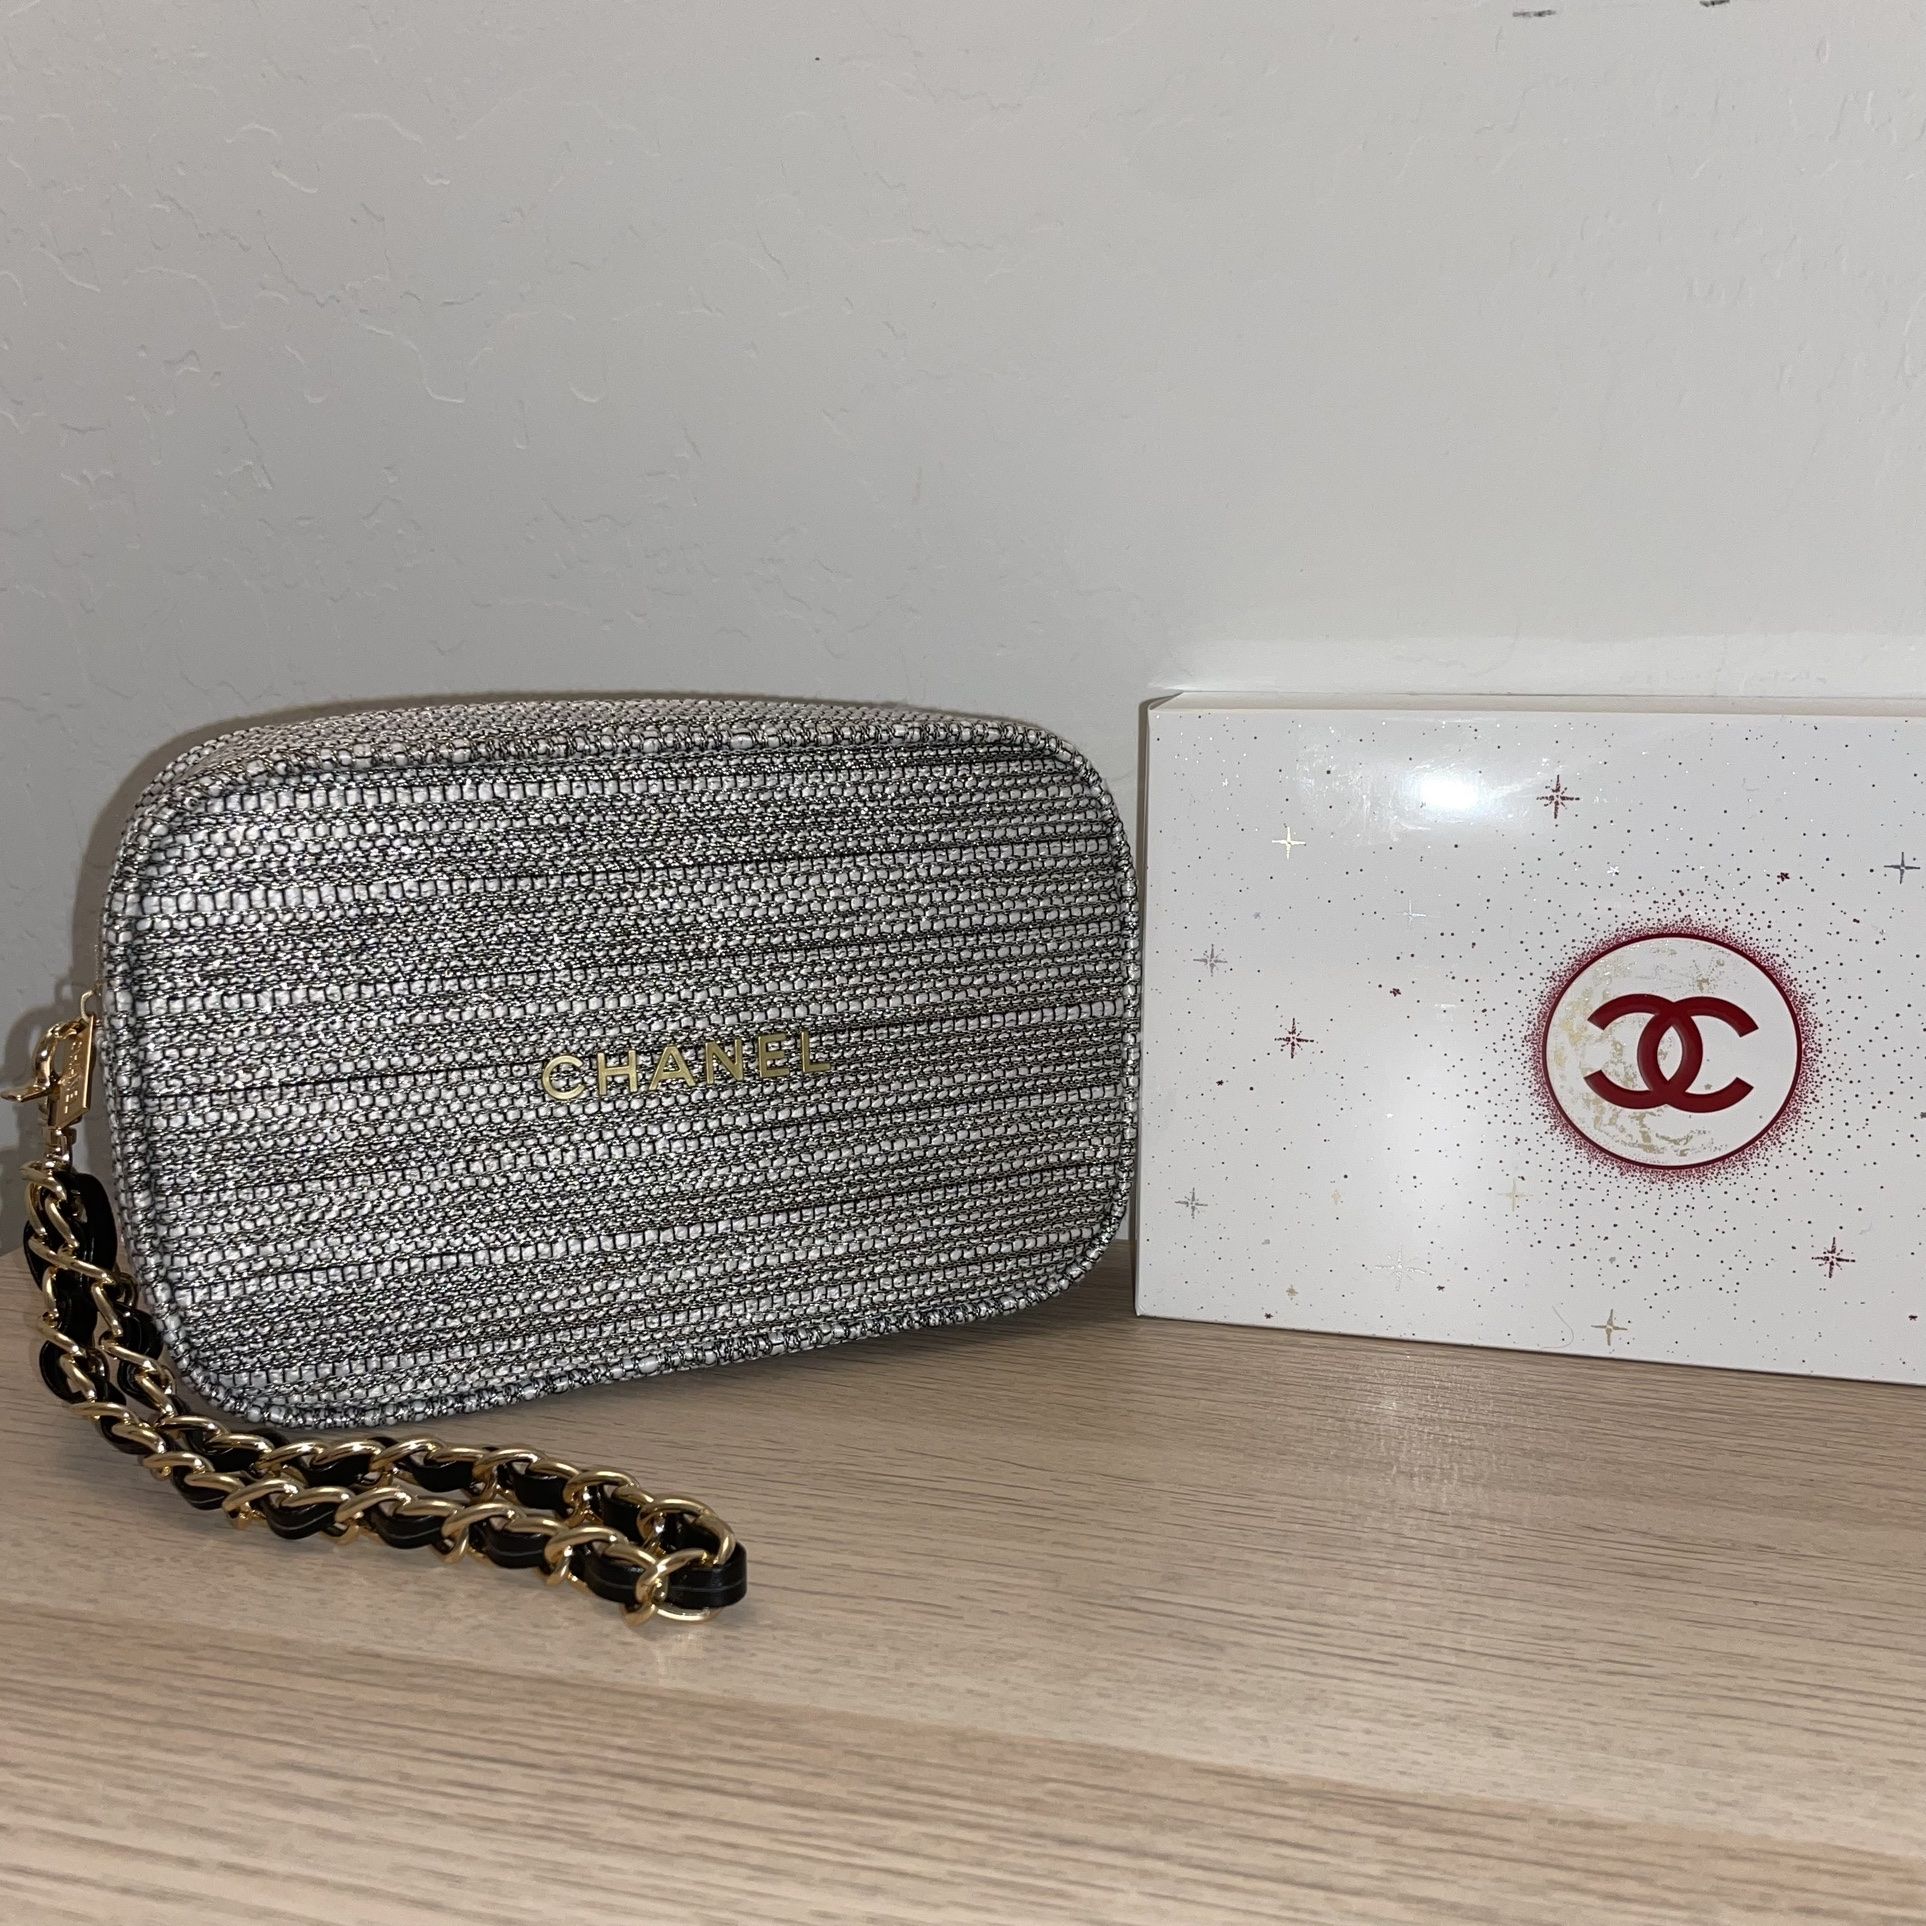 CHANEL, Bags, Chanelbeaute Black With Gold Glitter Cross Body Or Makeup  Bag New In Box